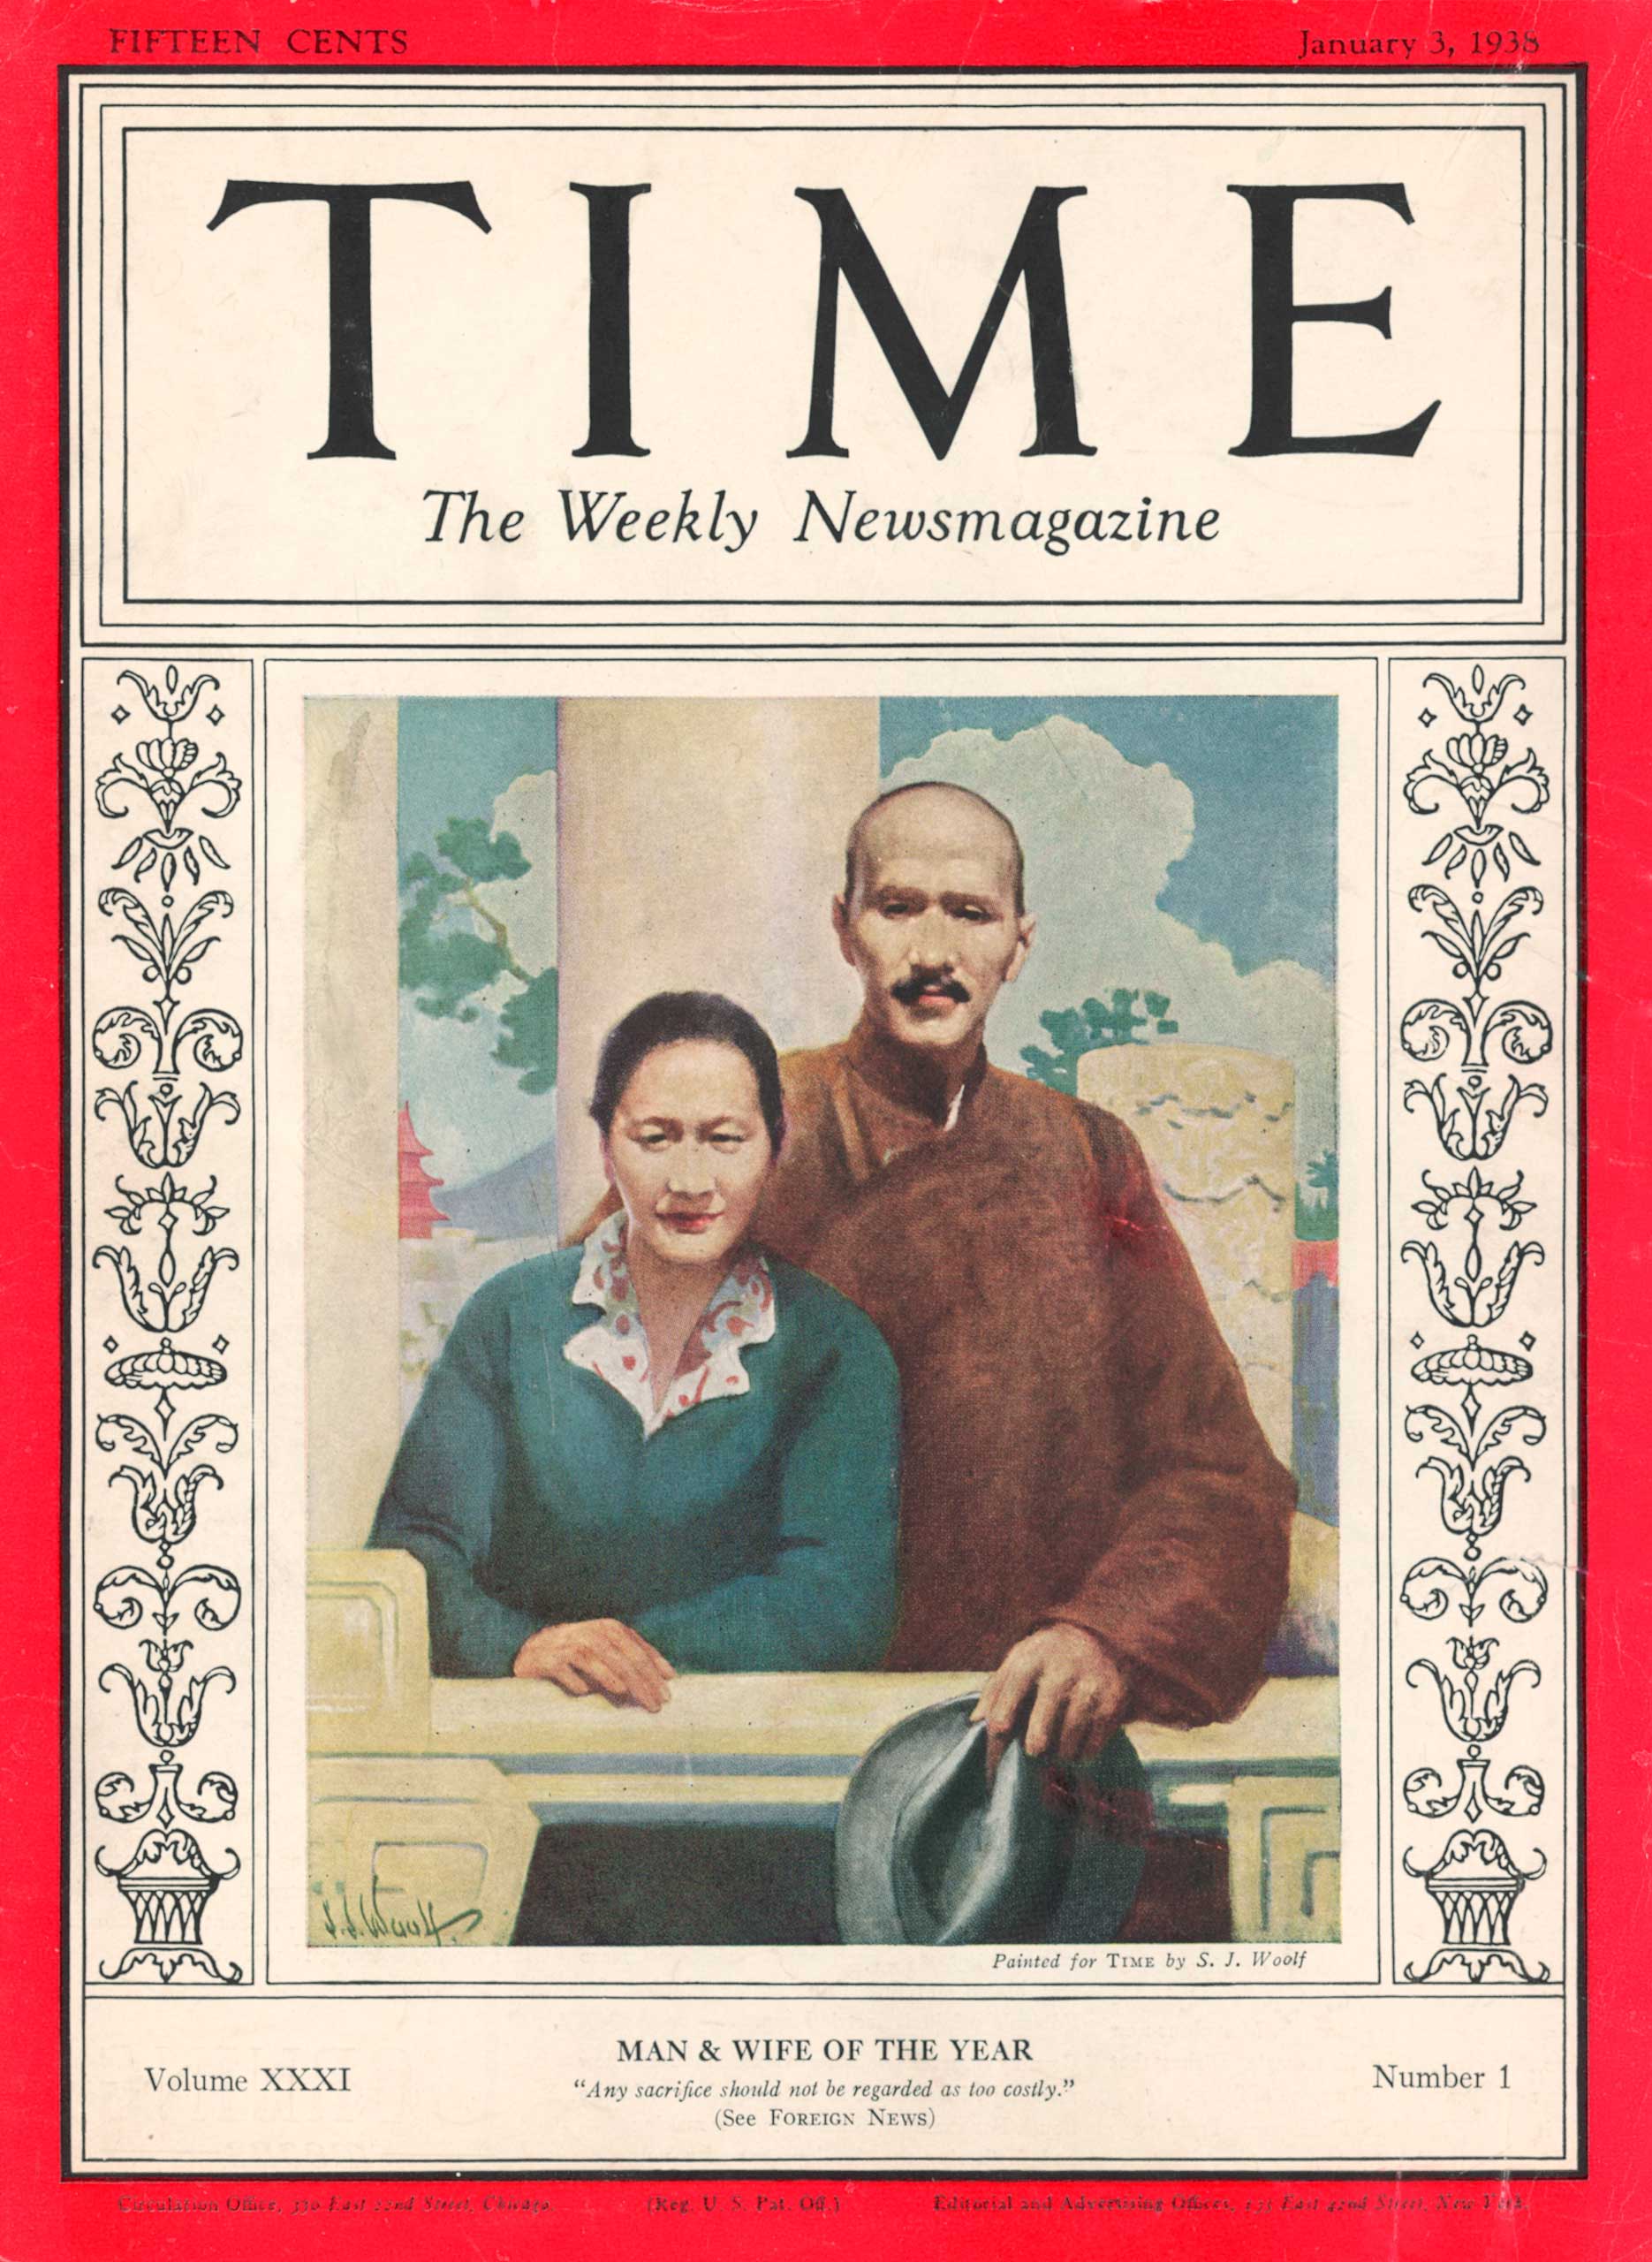 TIME person of the year 1937: Chiang Kai-shek and Soong May-ling